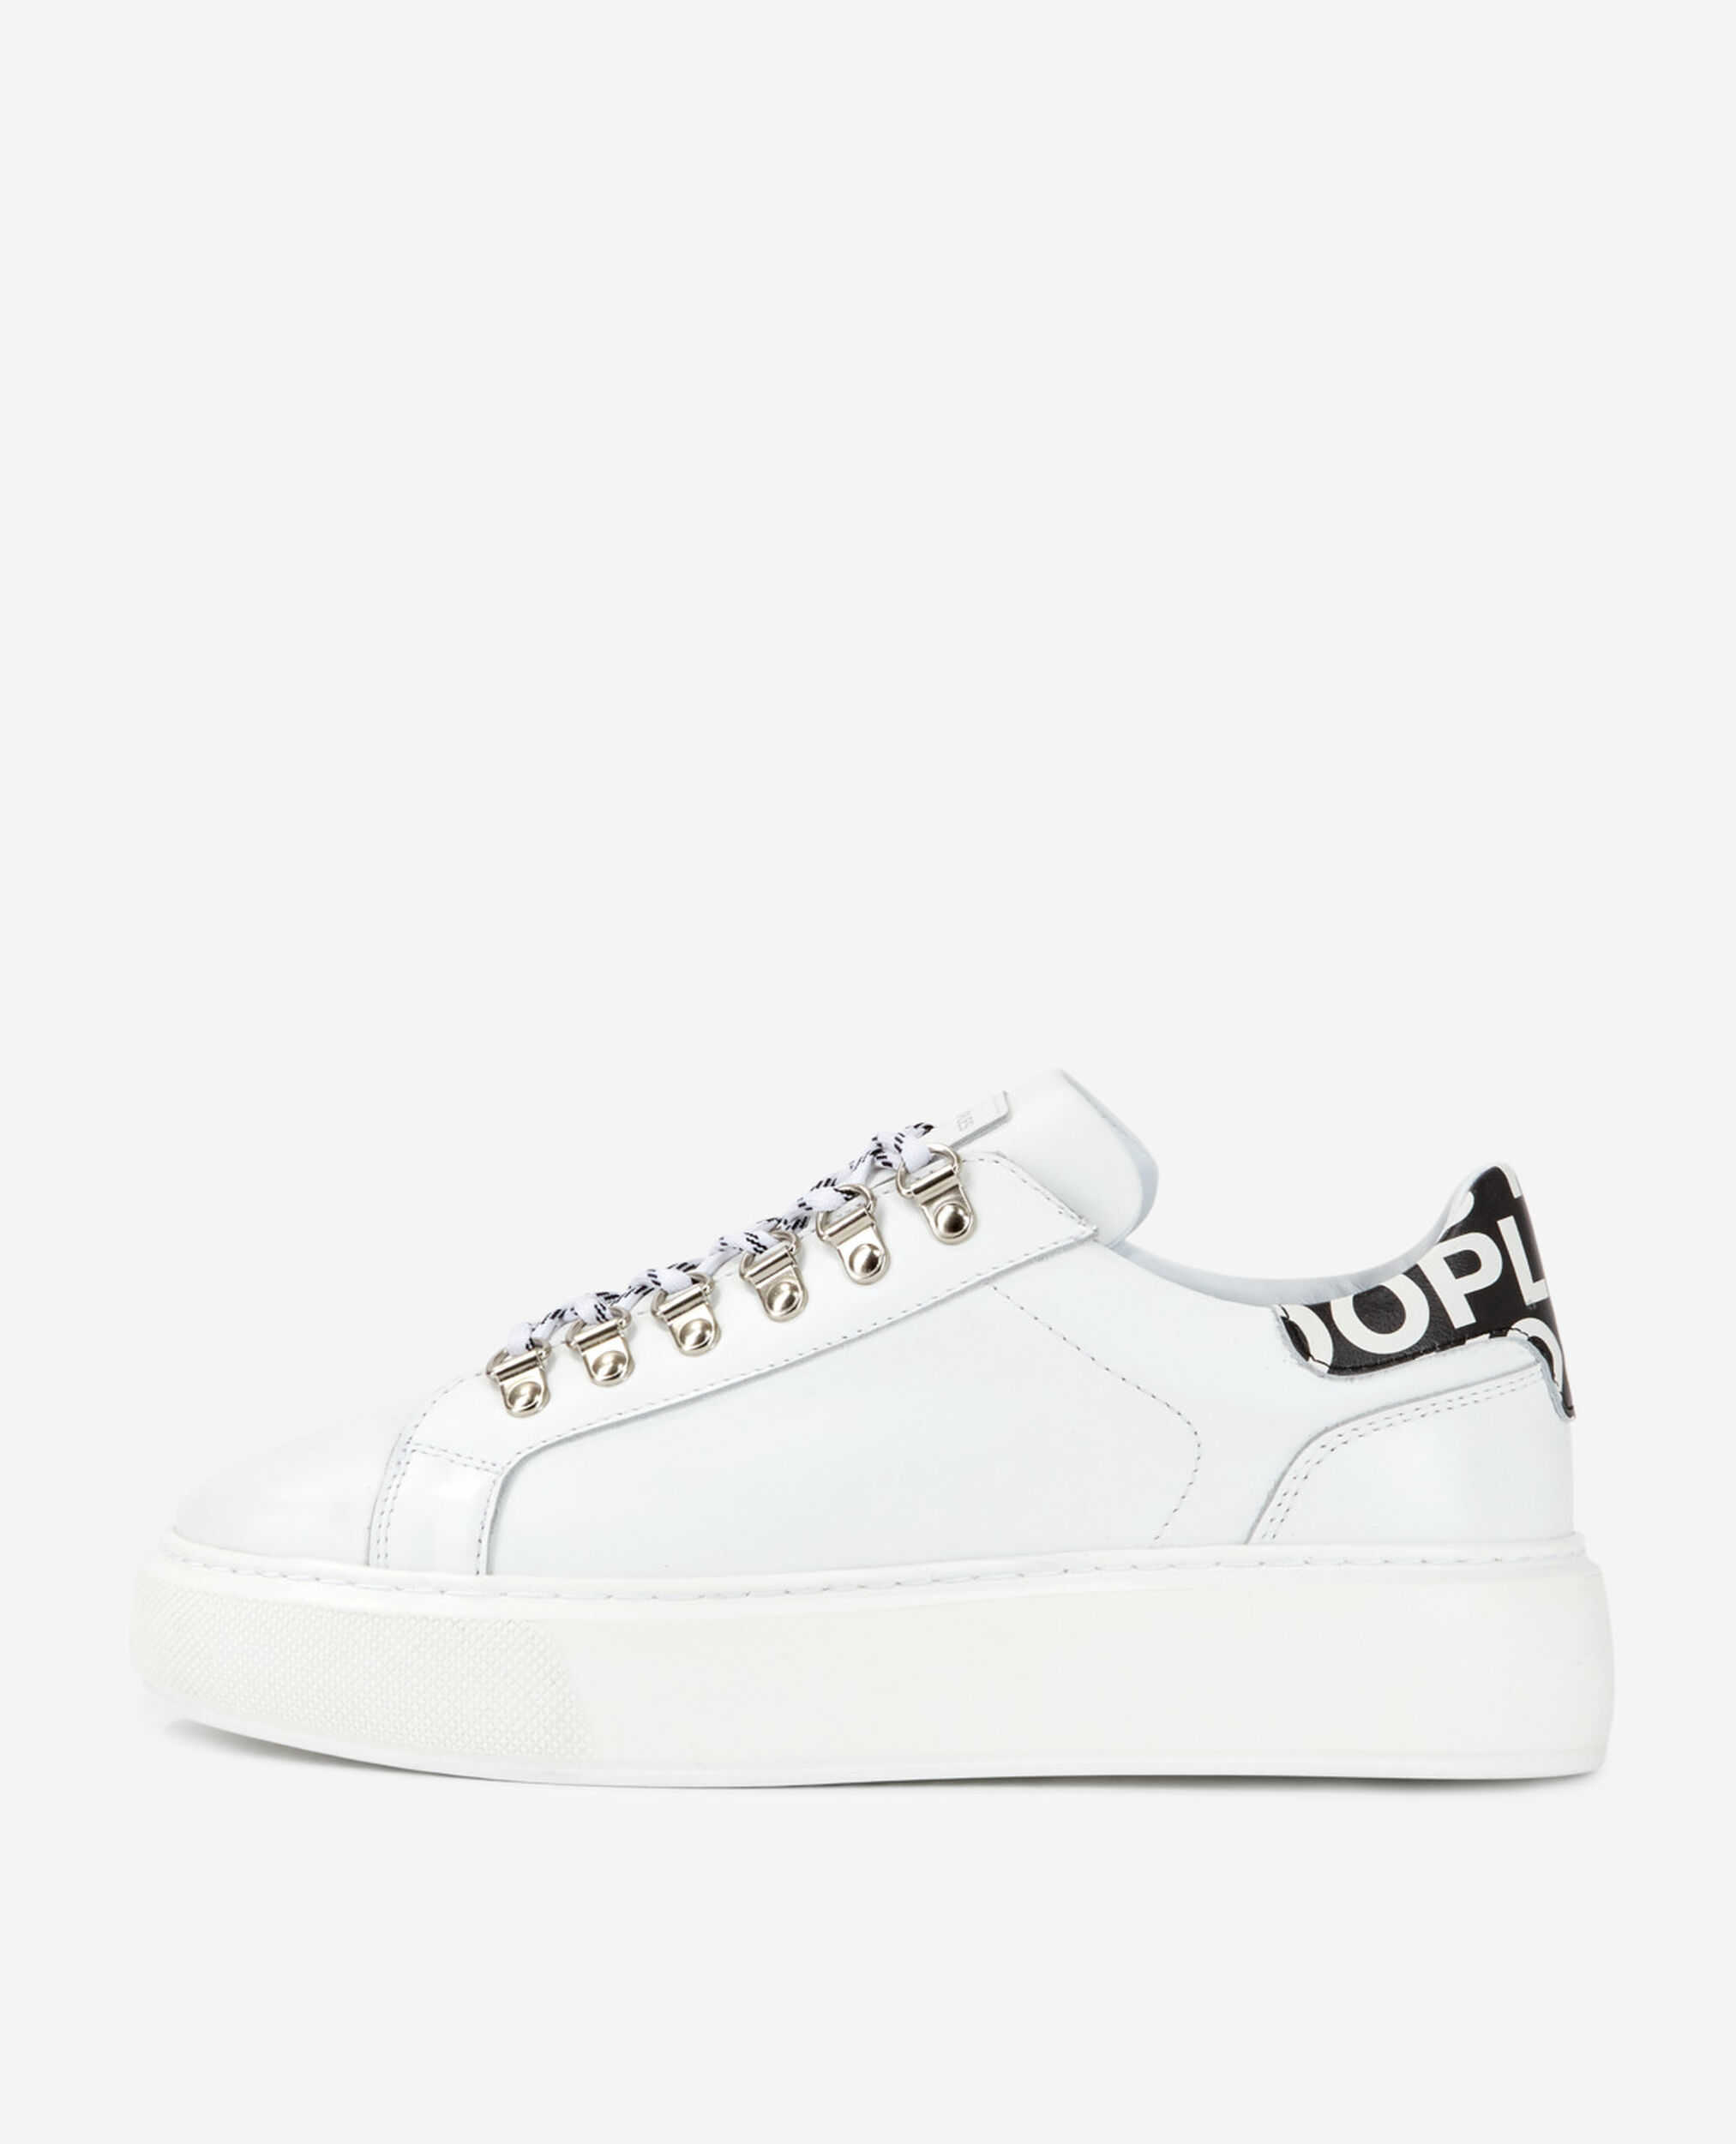 Leather sneakers, WHITE / BLACK, hi-res image number null